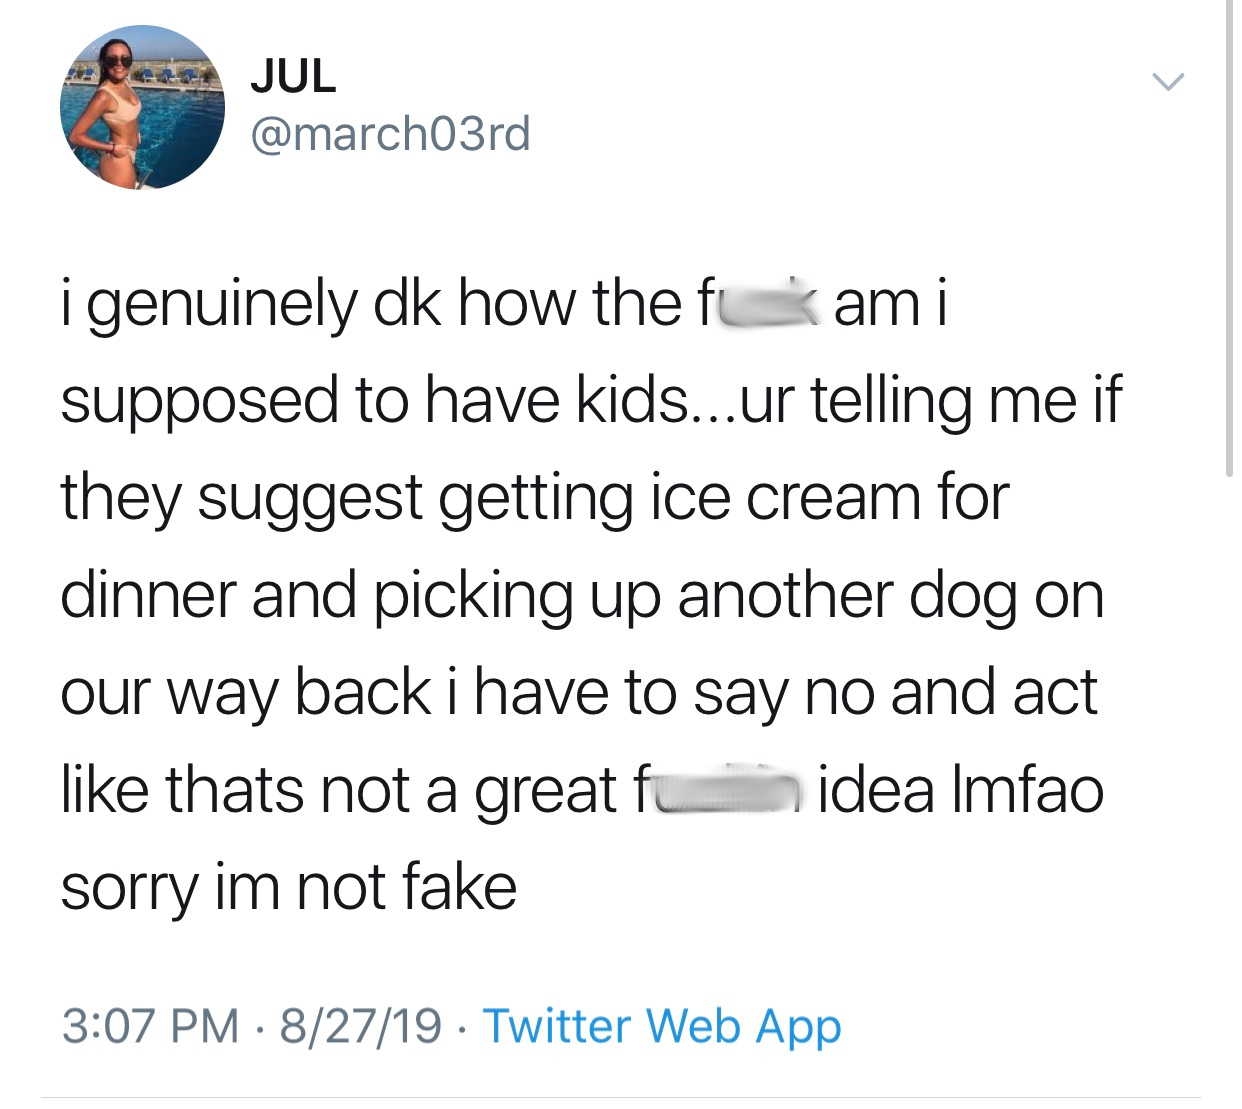 LGBT - Jul i genuinely dk how the flami supposed to have kids...ur telling me if they suggest getting ice cream for dinner and picking up another dog on our way back i have to say no and act thats not a great fun idea lmfao sorry im not fake 82719 Twitter